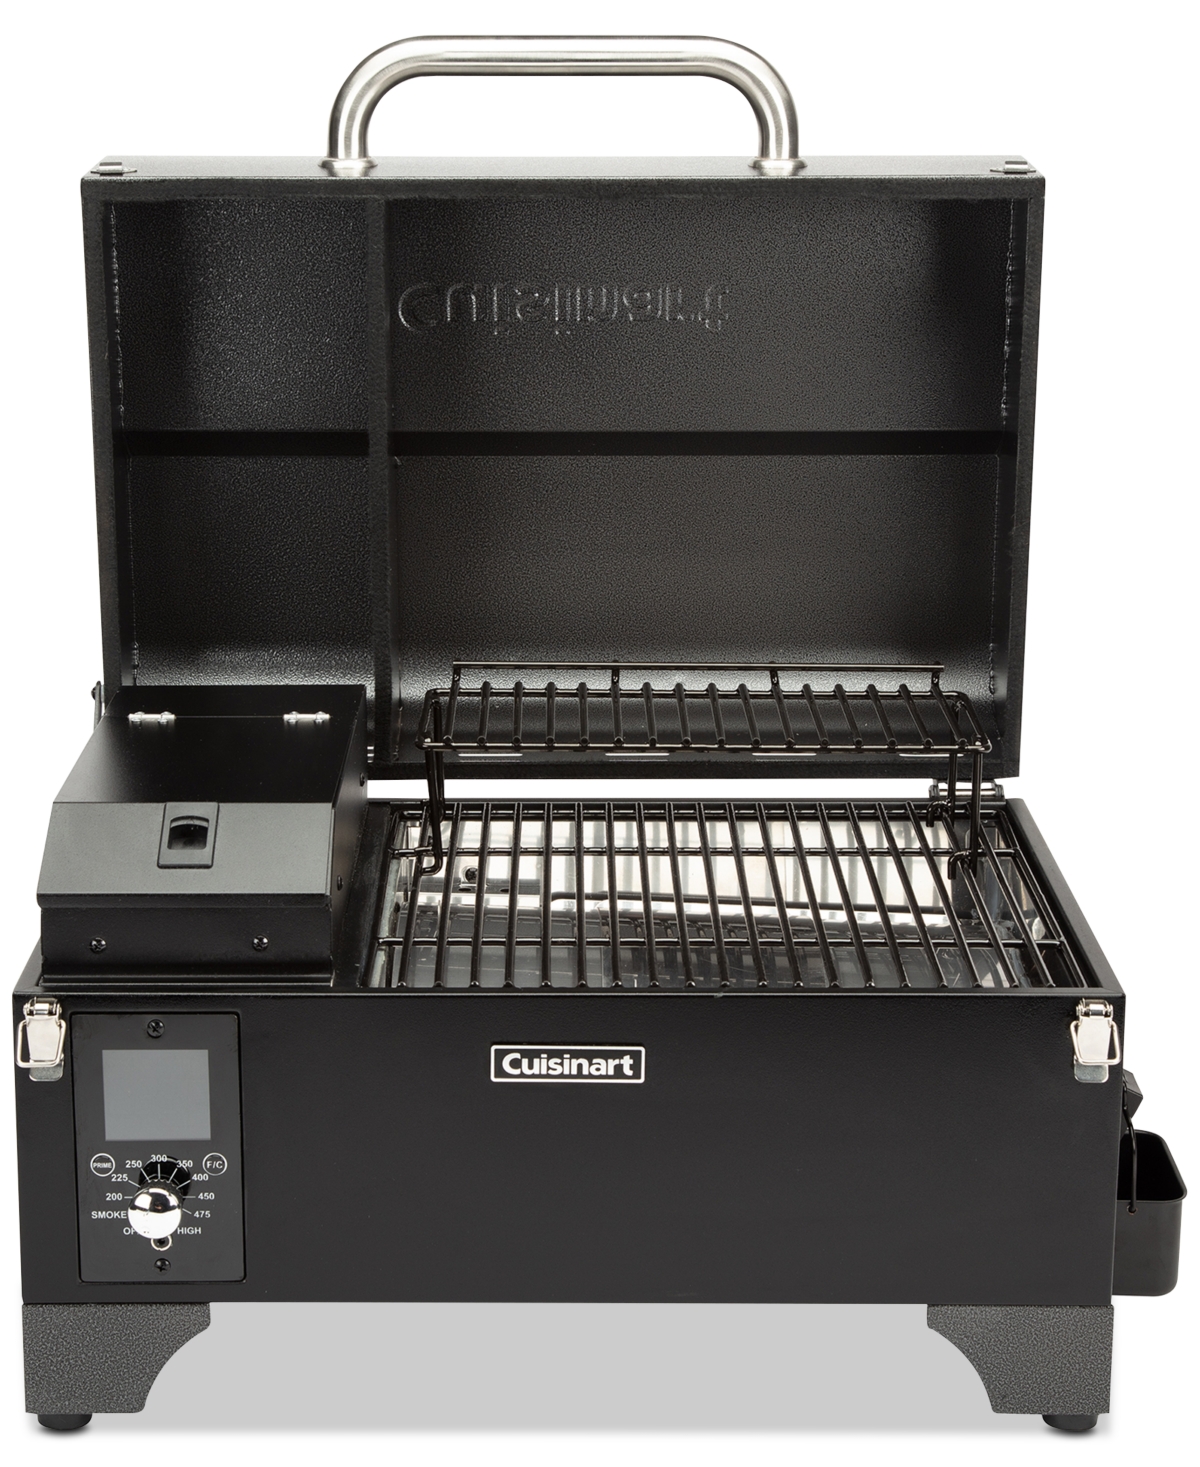 Cuisinart Portable Wood Pellet Grill In Black,stainless